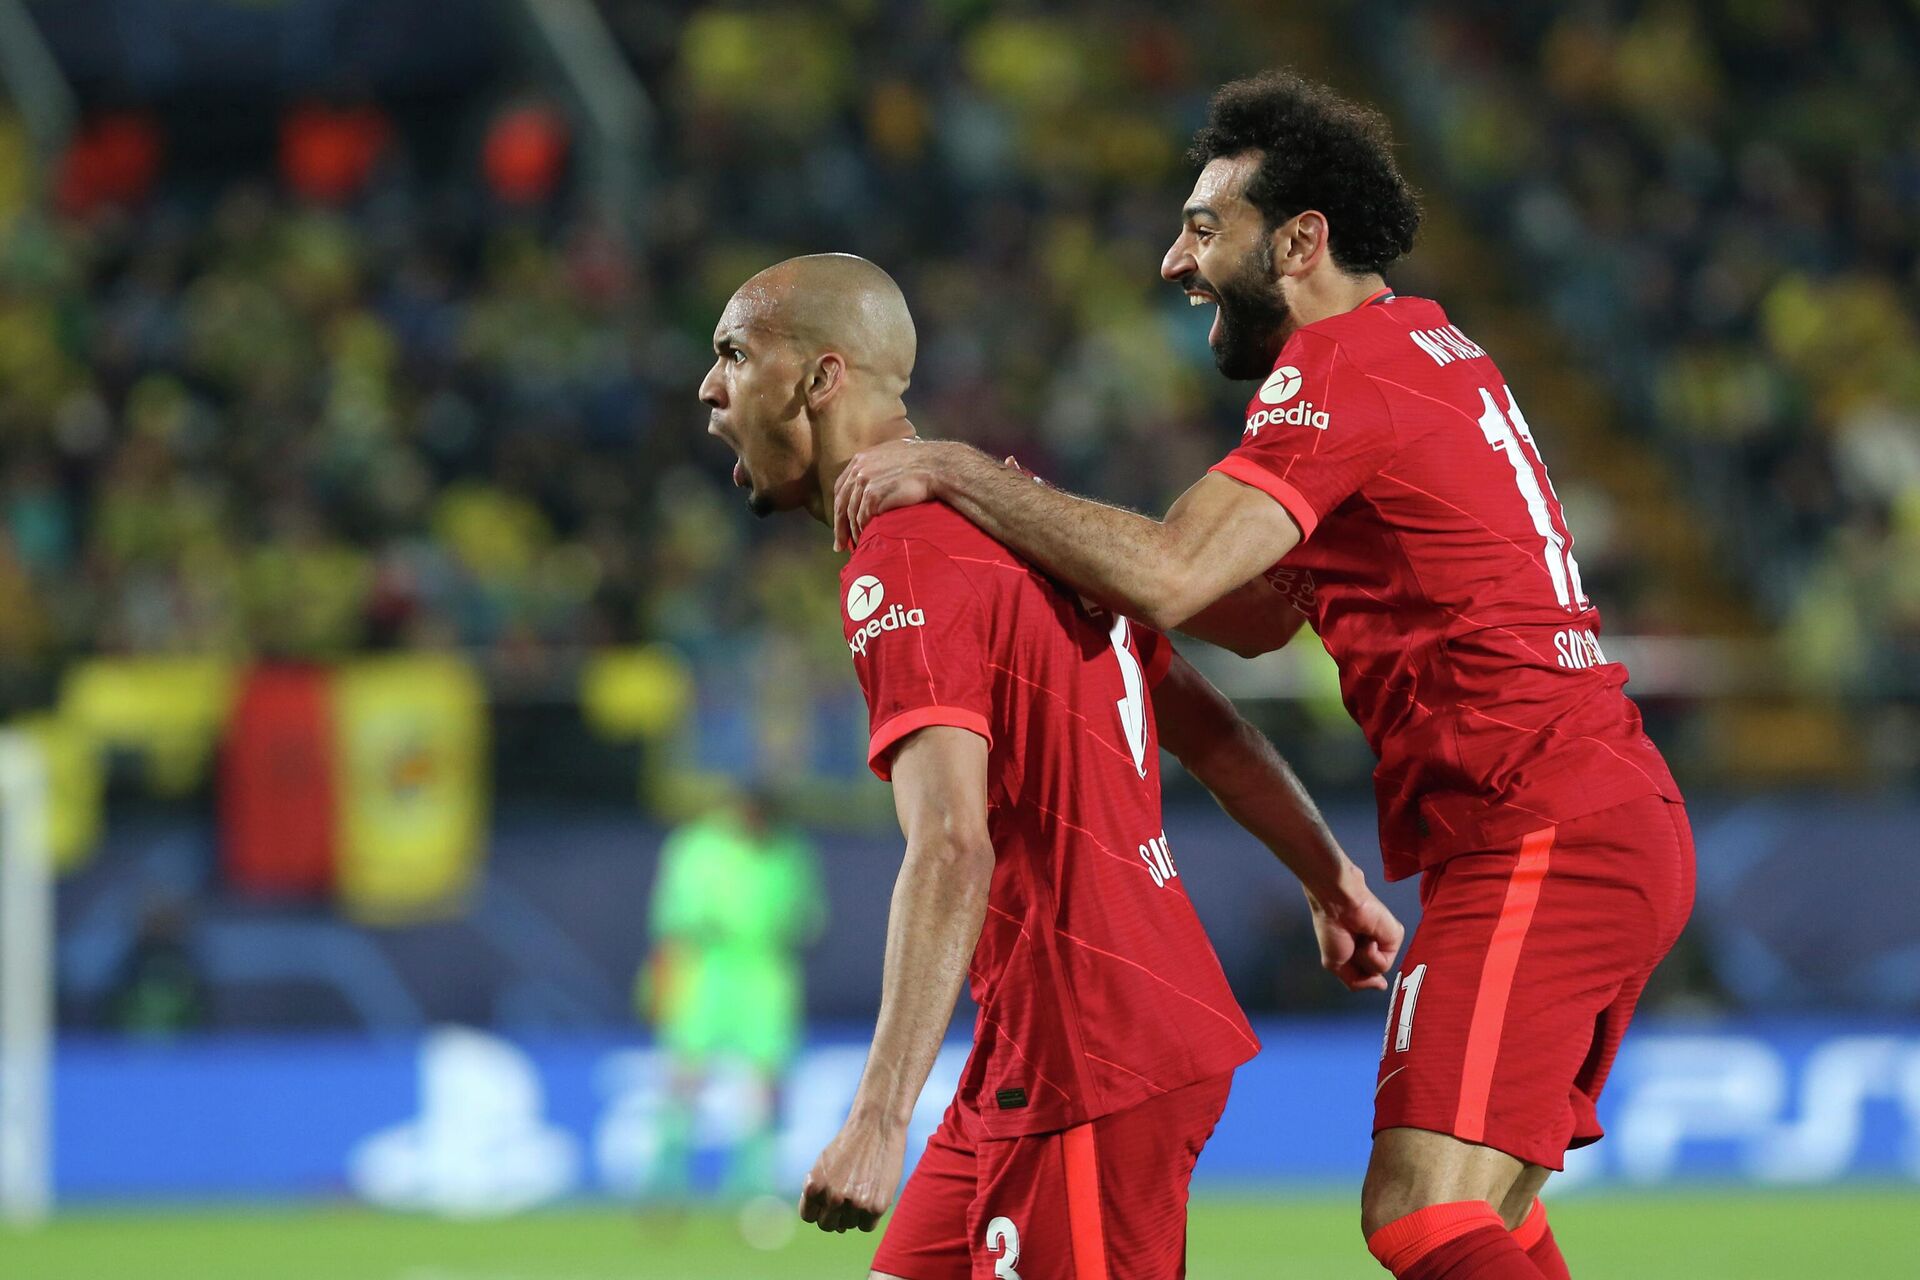 Liverpool's Fabinho celebrates after scoring his side's opening goal during the Champions League semi final, second leg soccer match between Villarreal and Liverpool at the Ceramica stadium in Villarreal, Spain, Tuesday, May 3, 2022.  - Sputnik International, 1920, 03.05.2022